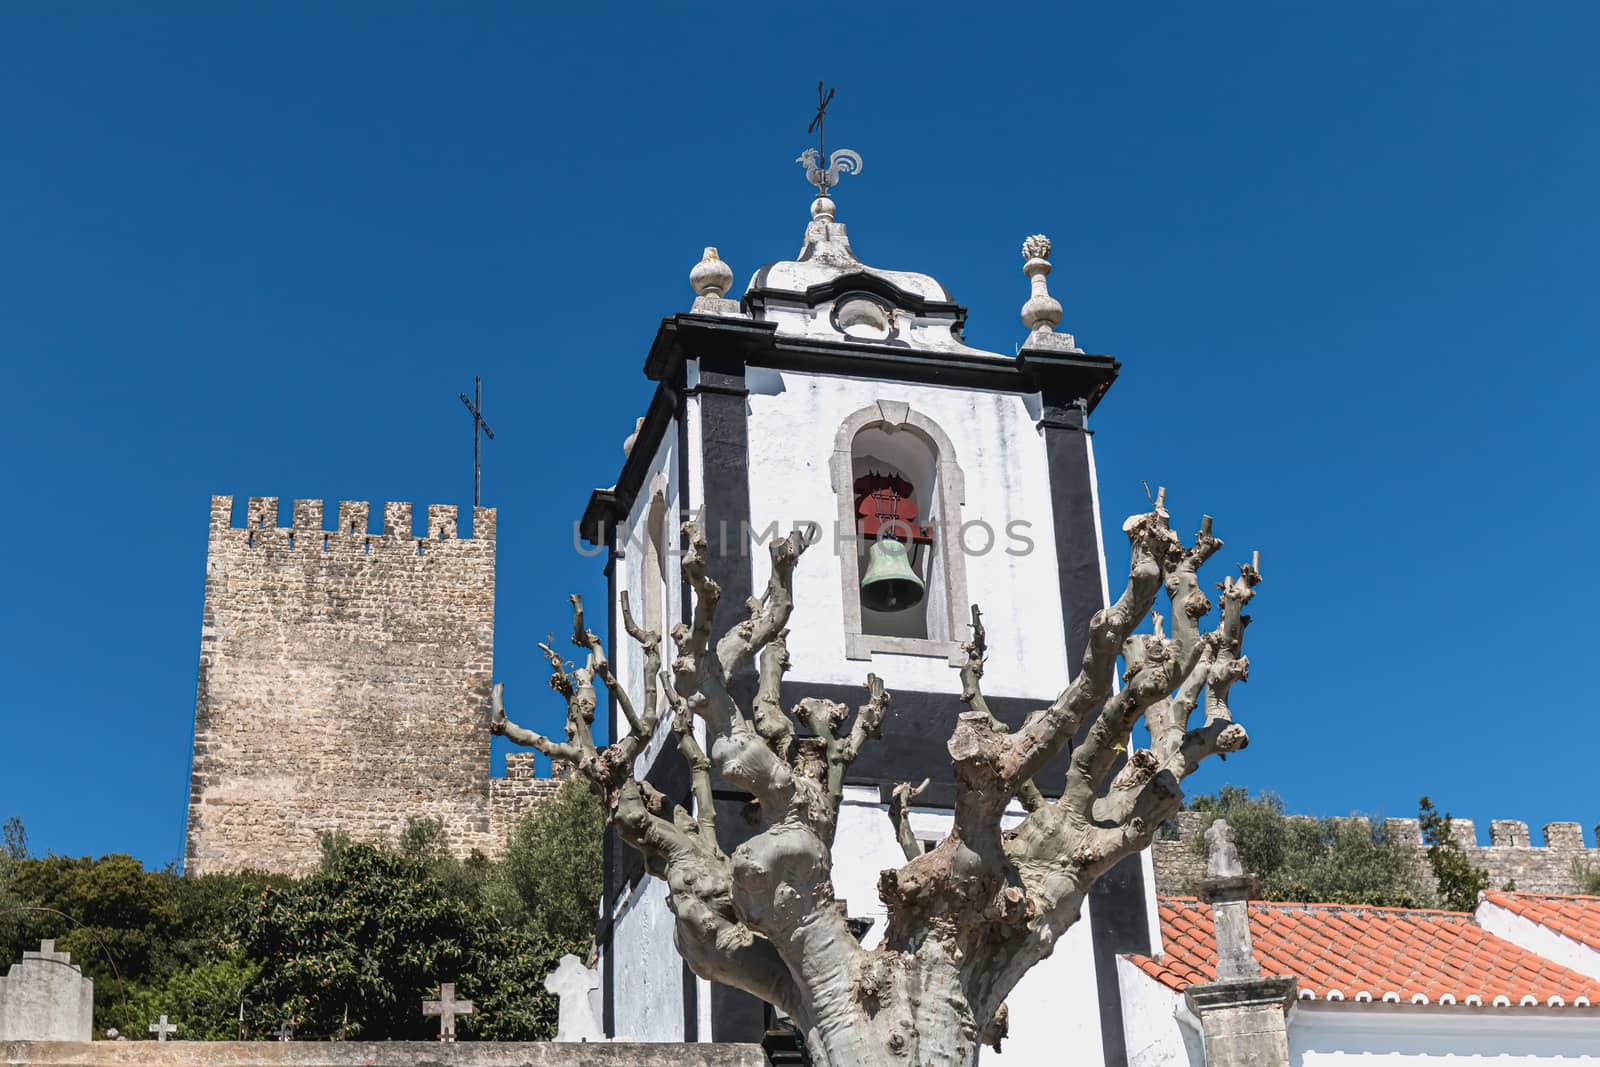 View of the entrance to the historic city of obidos, Portugal by AtlanticEUROSTOXX